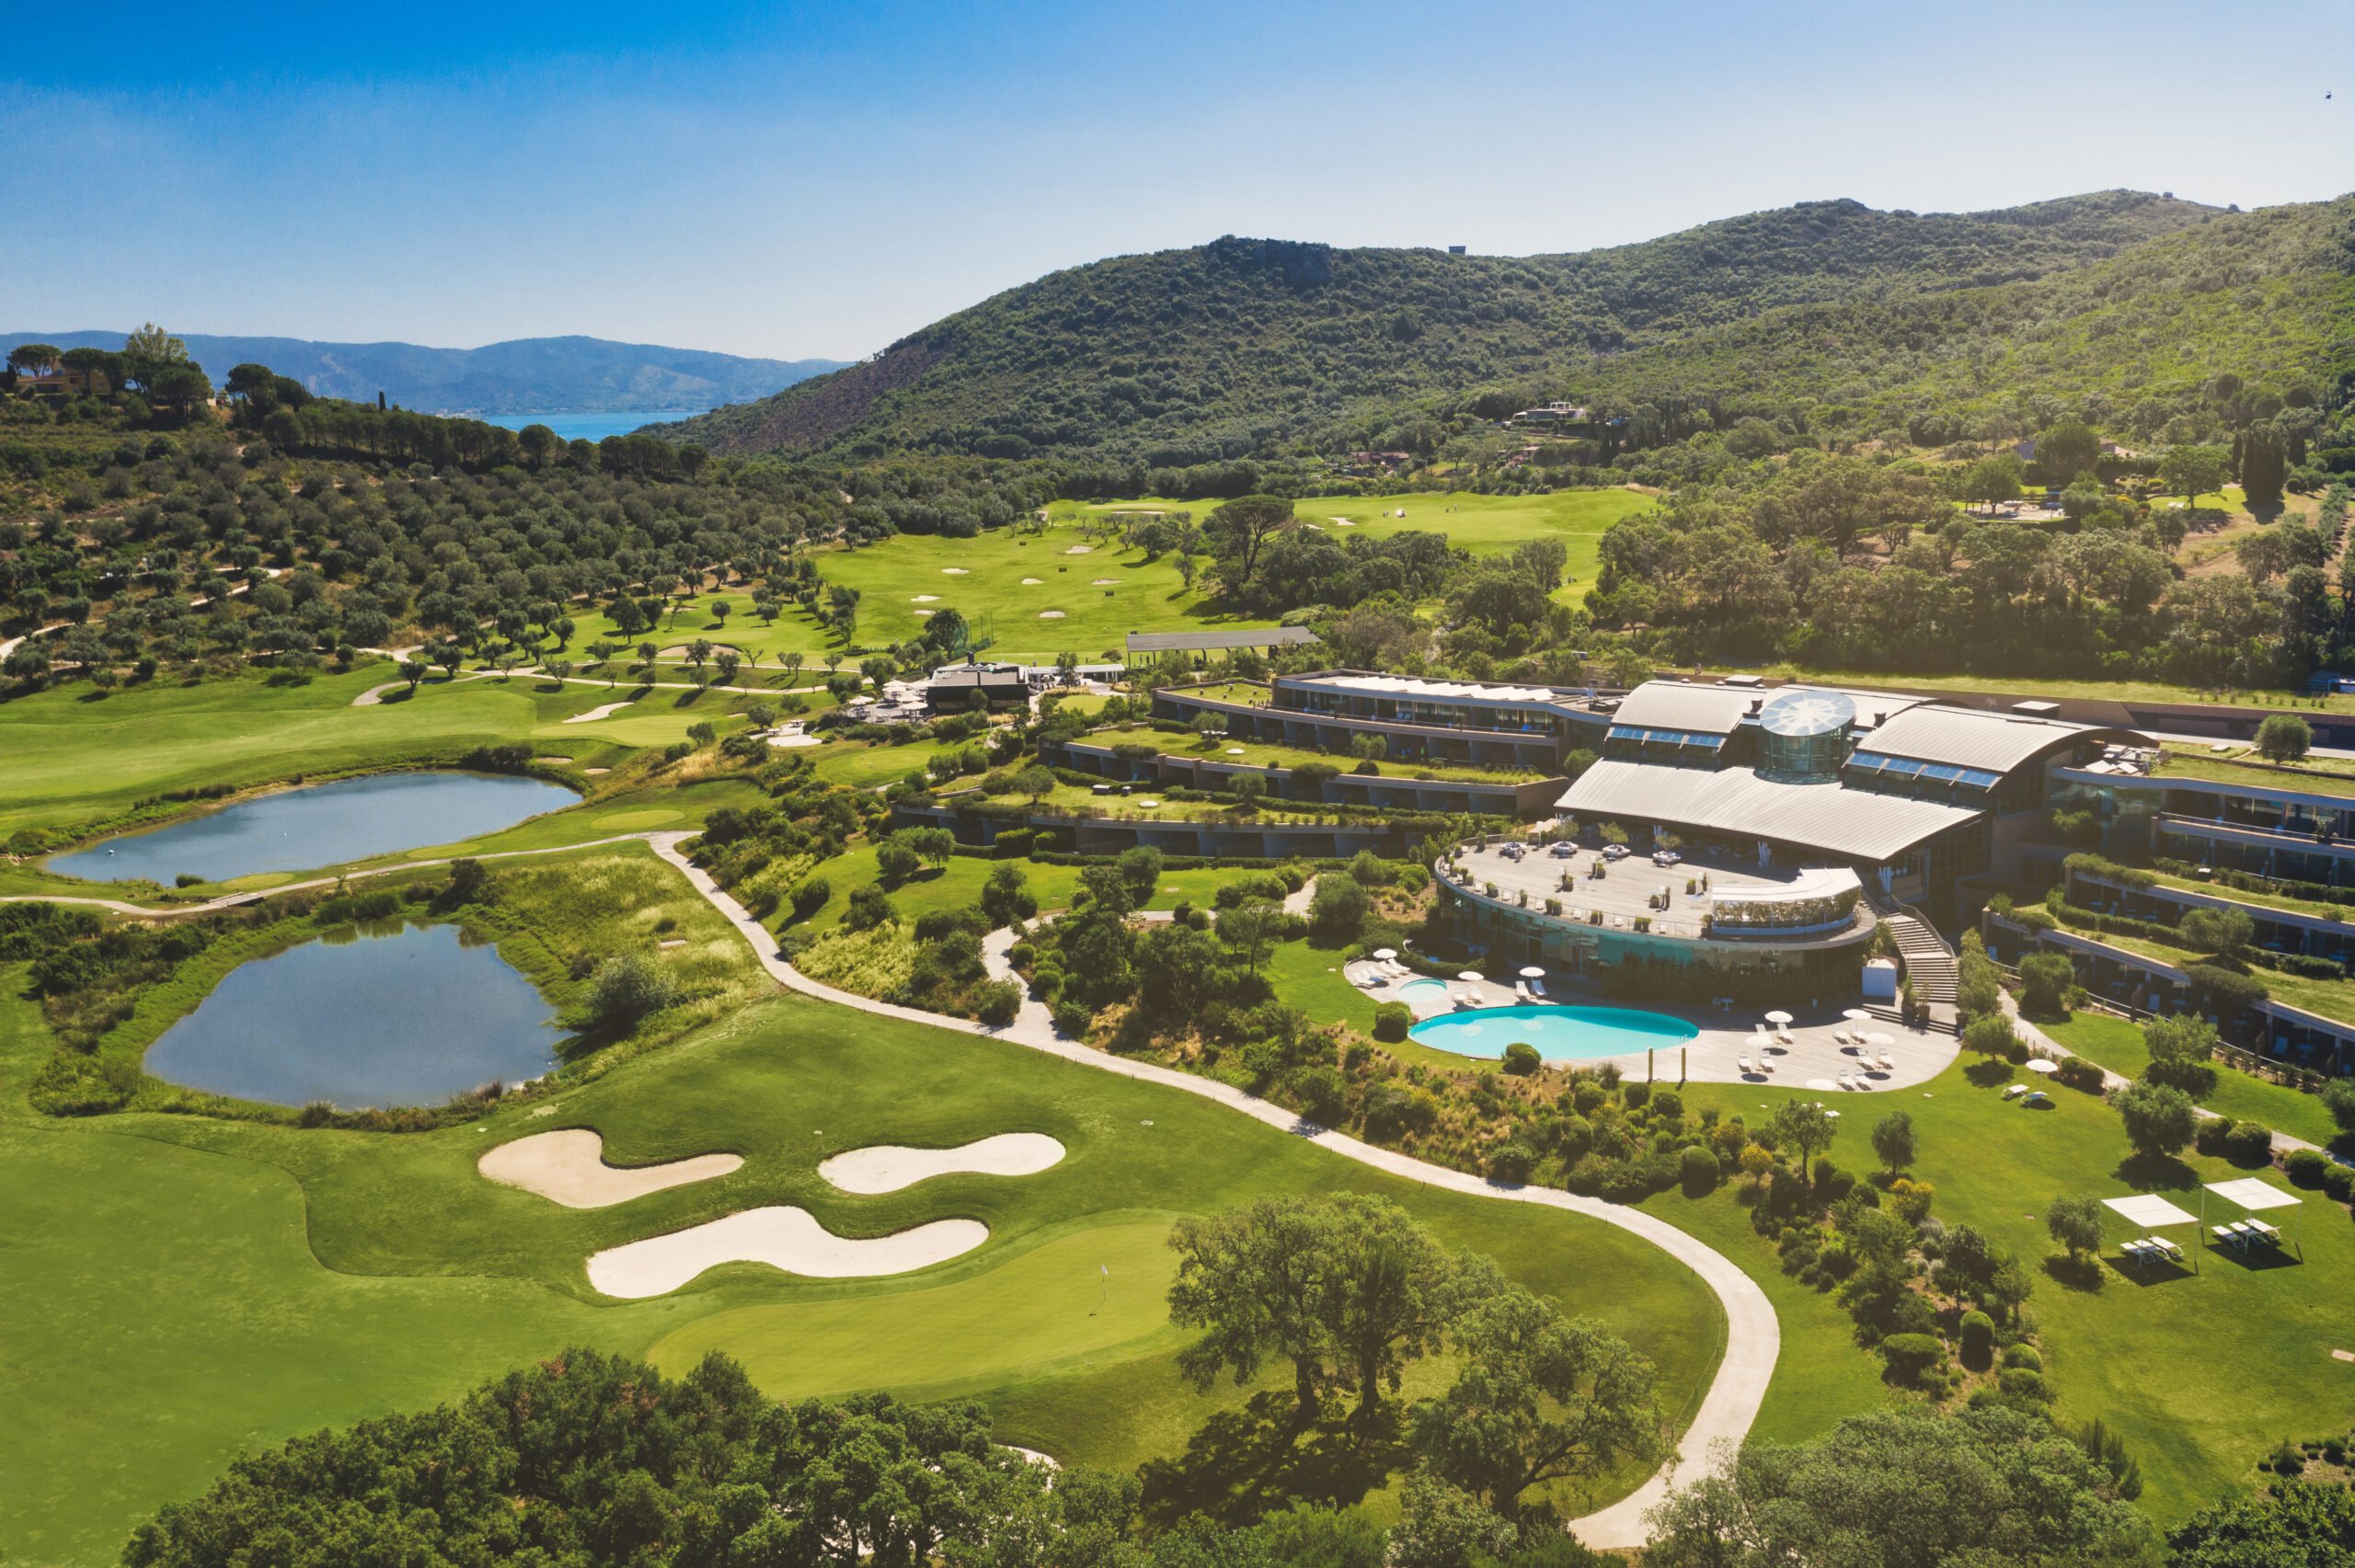 Awesome Argentario, the PGA National Golf Course of Italy